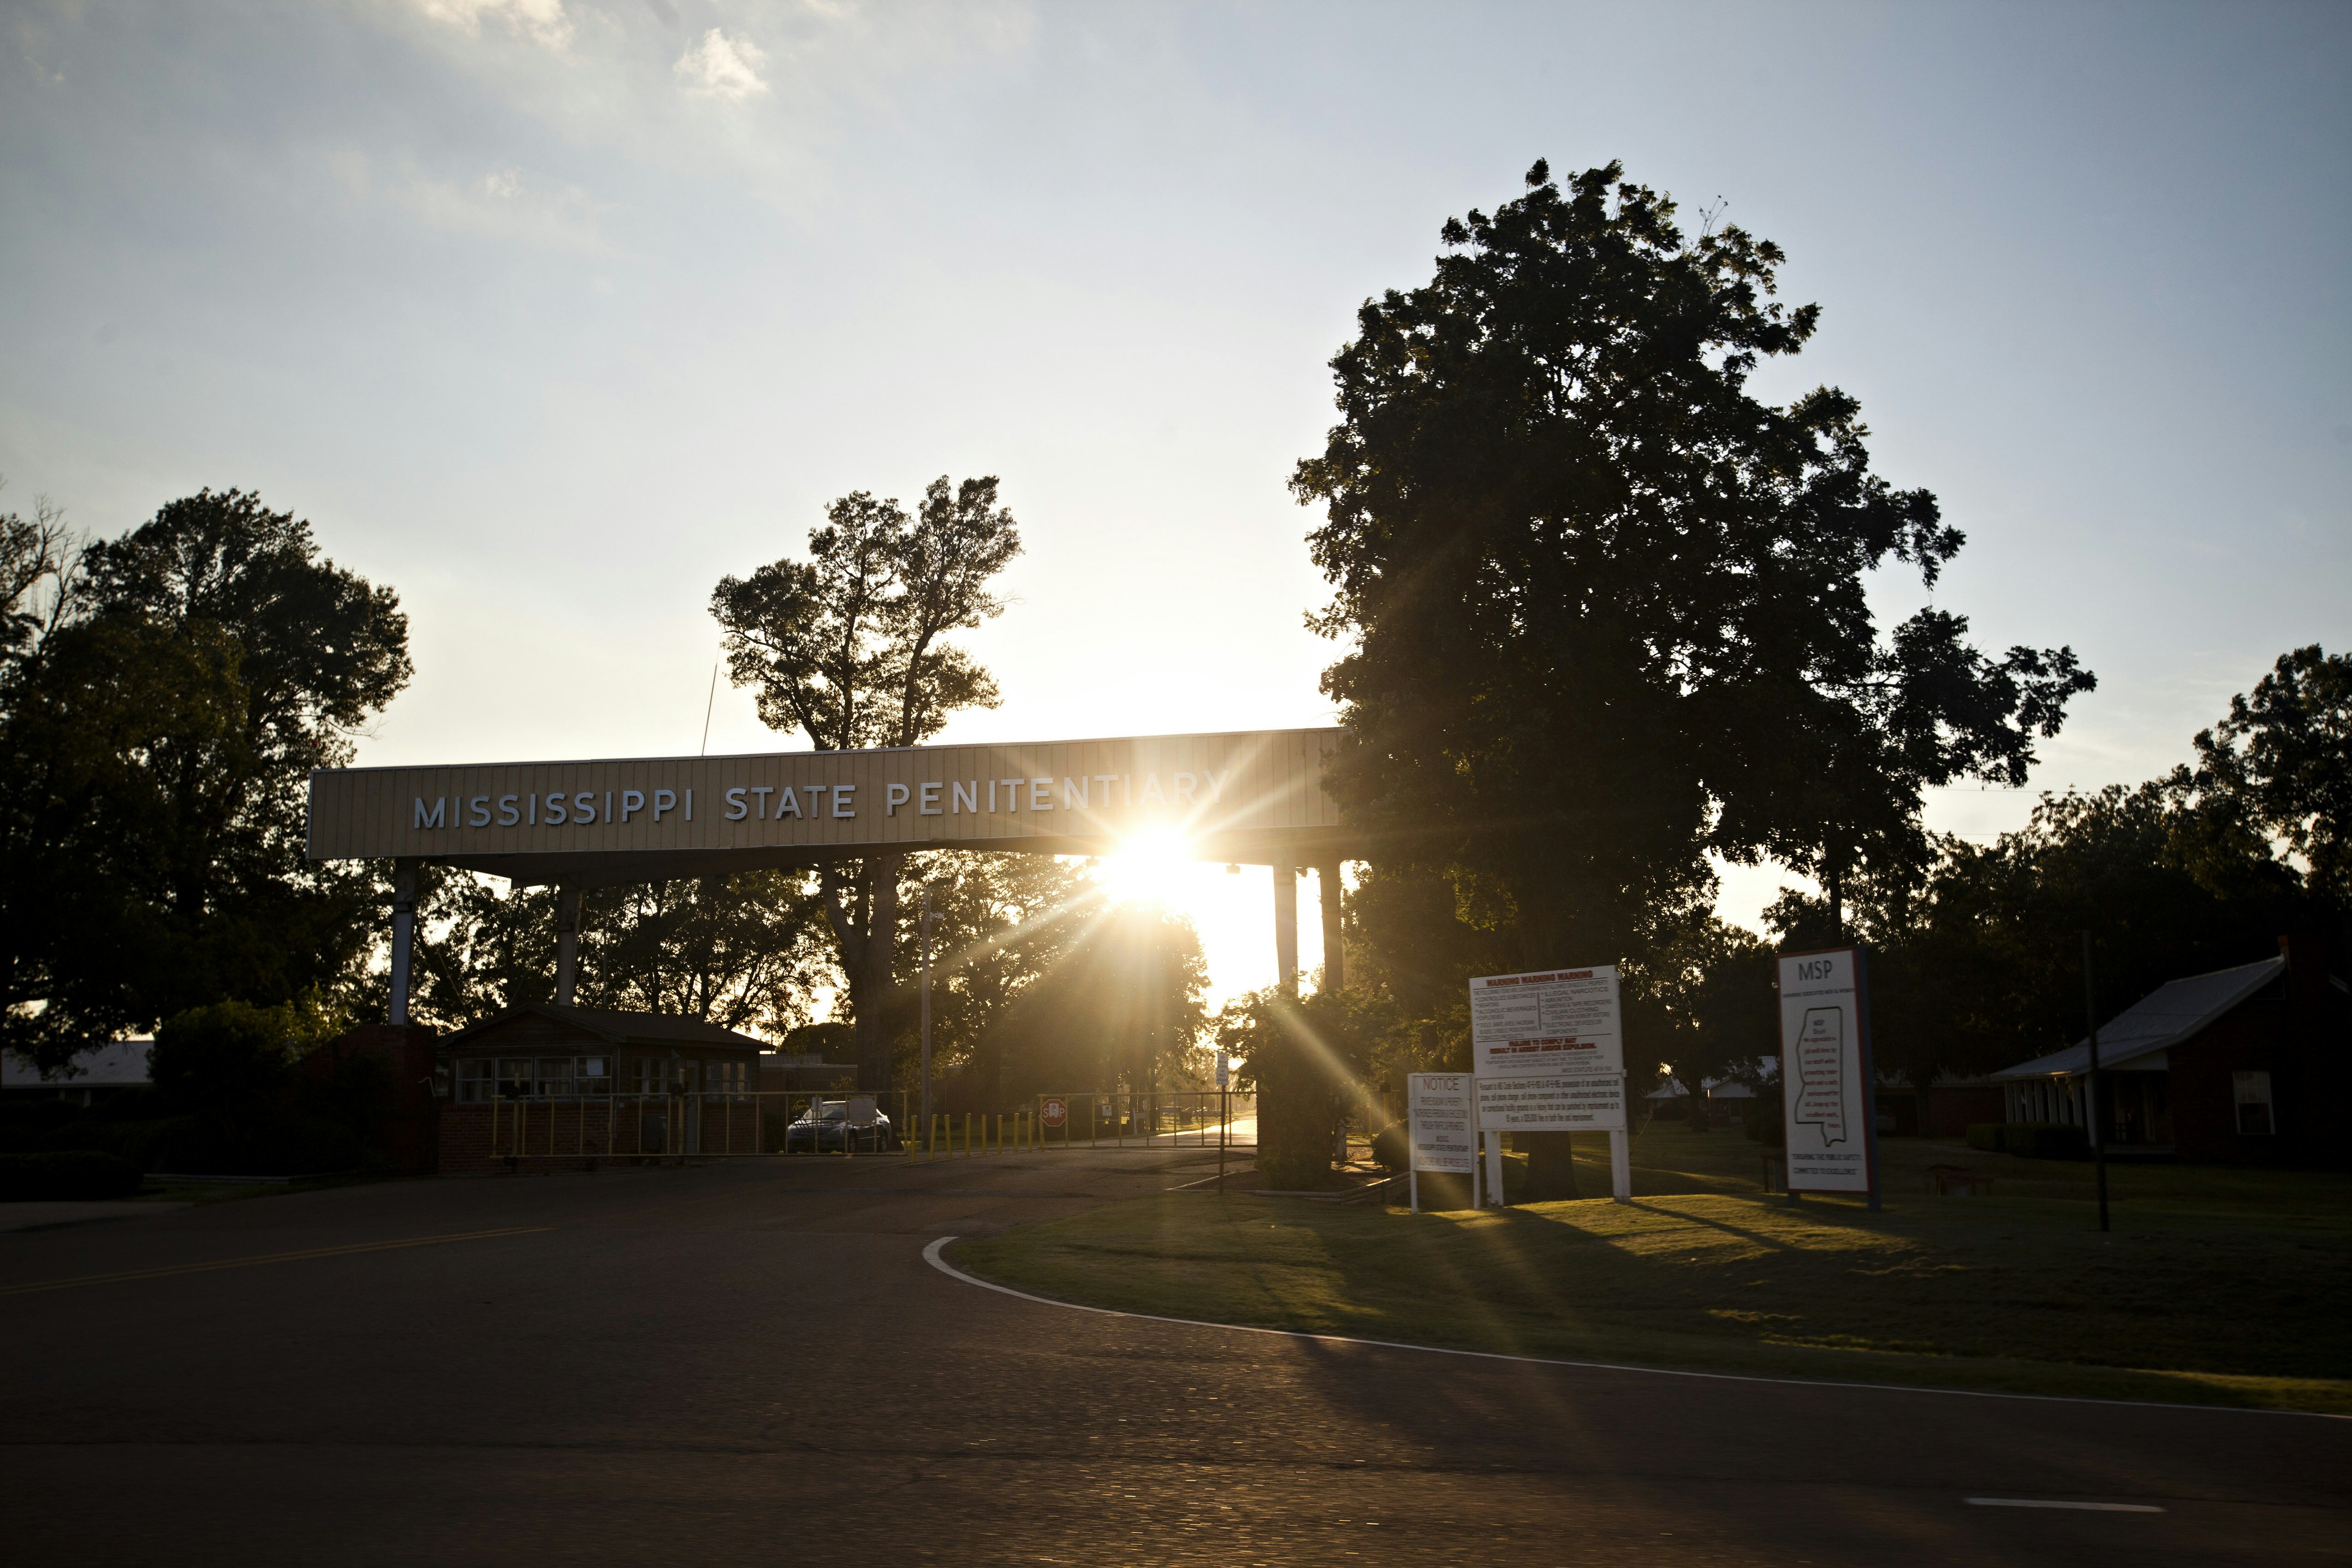 The Mississippi State Penitentiary, where Eddie Lee Howard Jr. has been on death row for two decades for the murder and rape of an 84-year-old woman, in Parchman, Miss., Sept. 10, 2014. A disputed bite-mark identification is at the center of Howard?s appeal, which cites that the method used in the obscure field of forensic dentistry is unreliable, due to be filed on Monday with the Mississippi Supreme Court. (Andrea Morales/The New York Times)